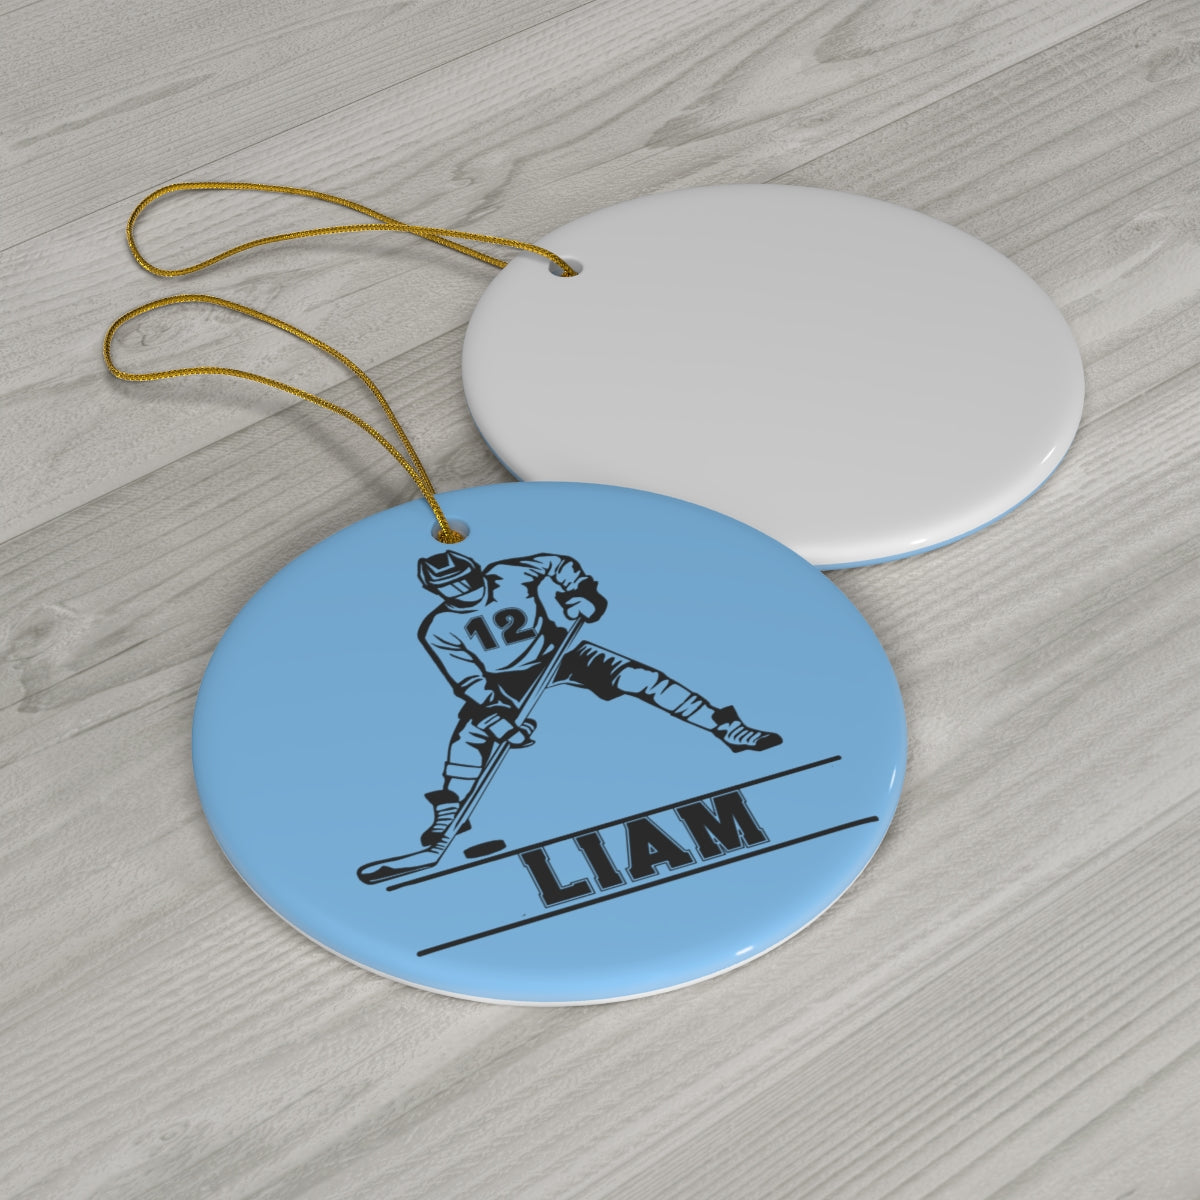 Ice Hockey Christmas Ornament with a Name